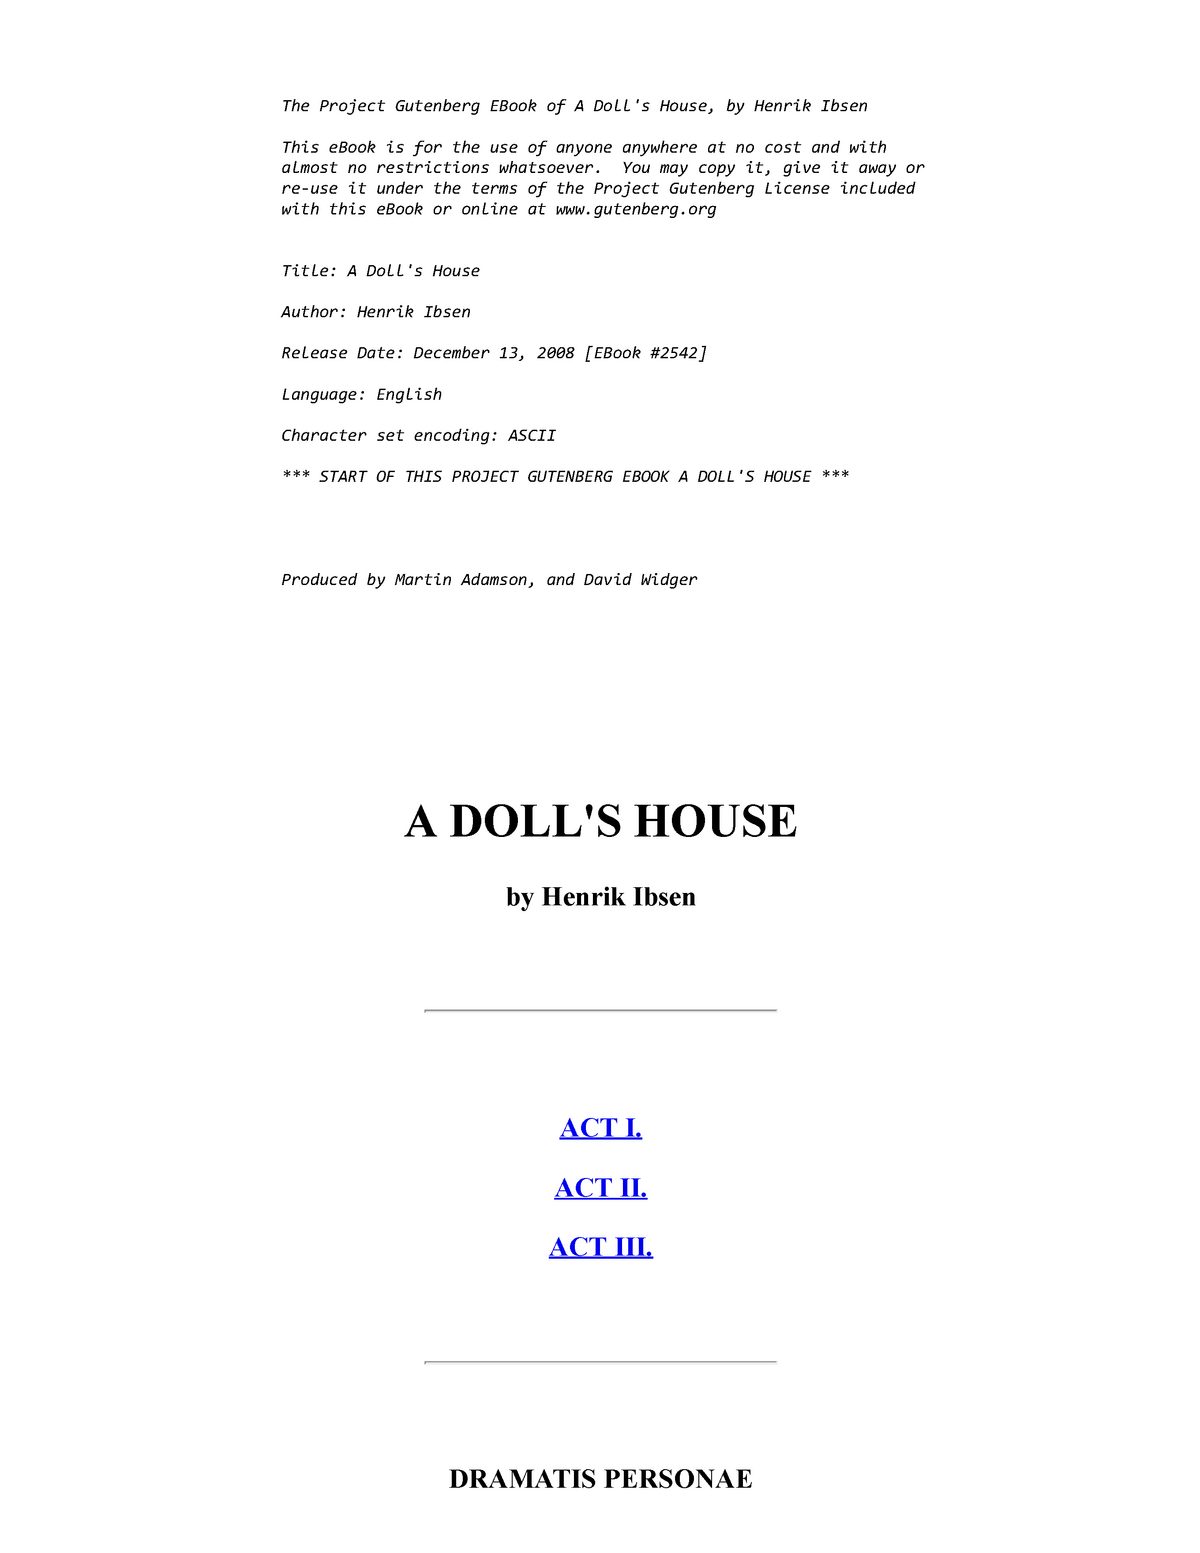 a doll's house project gutenberg